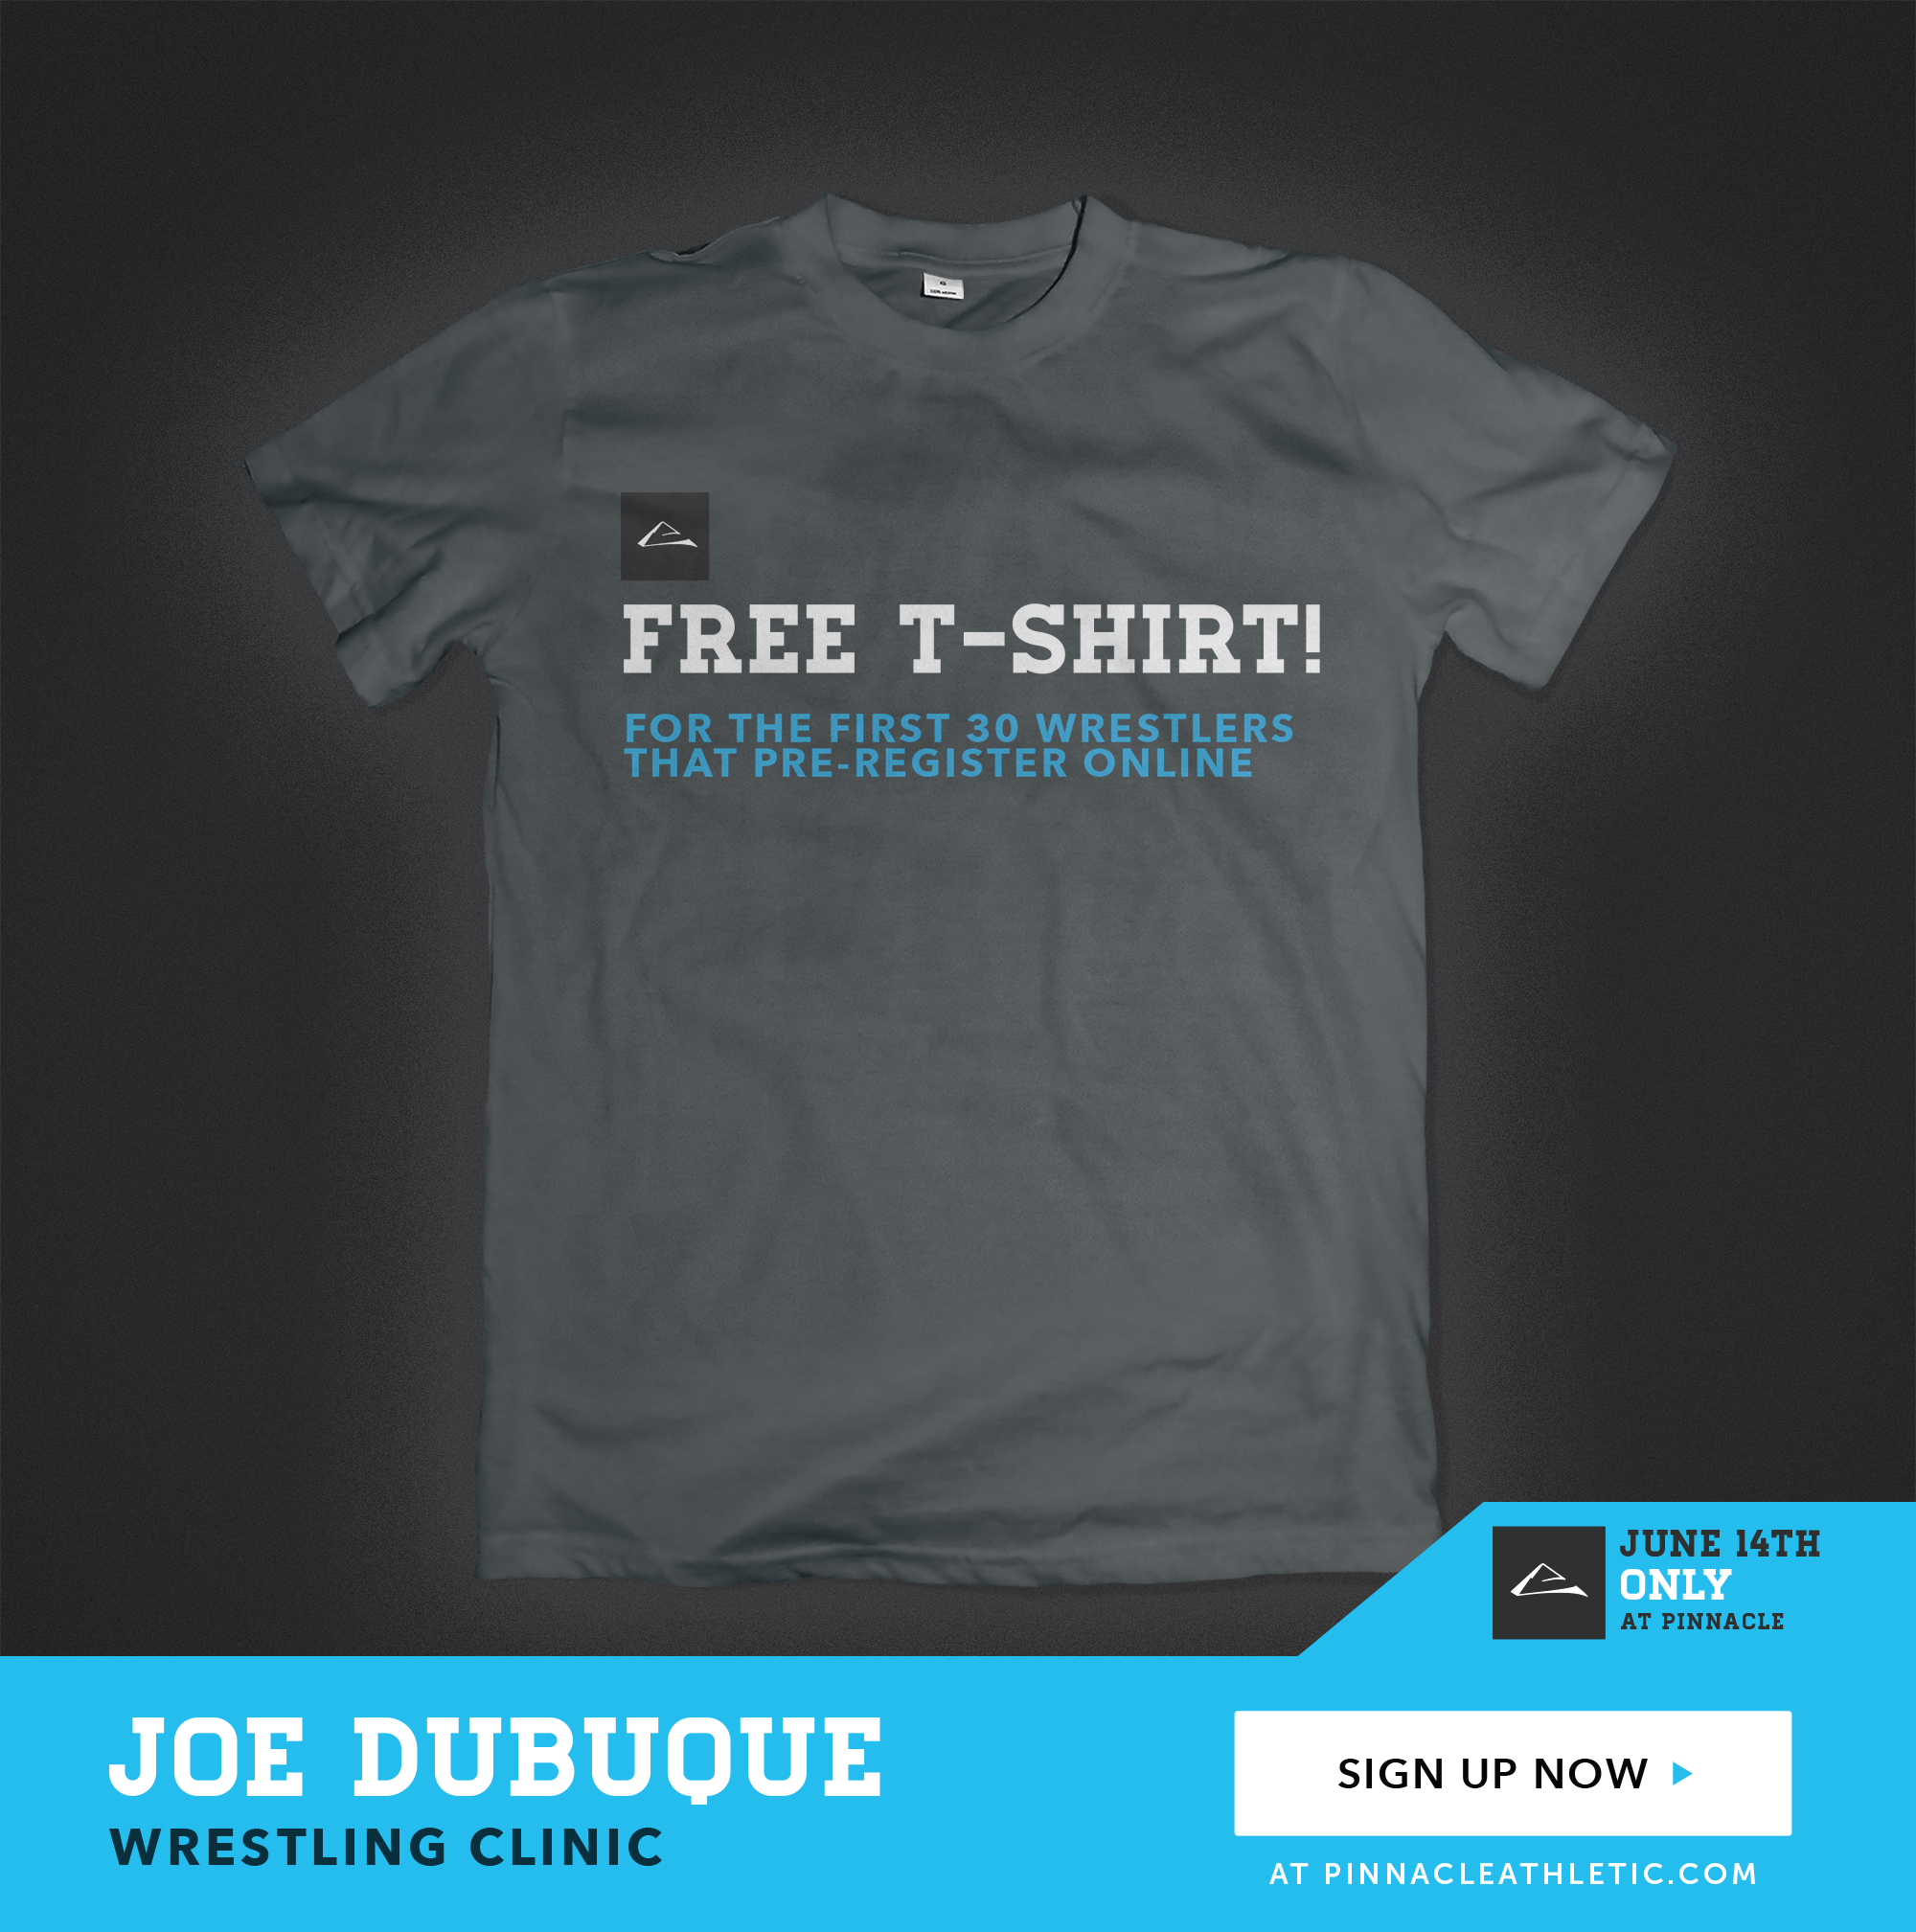 Preregister now and get a free t-shirt!